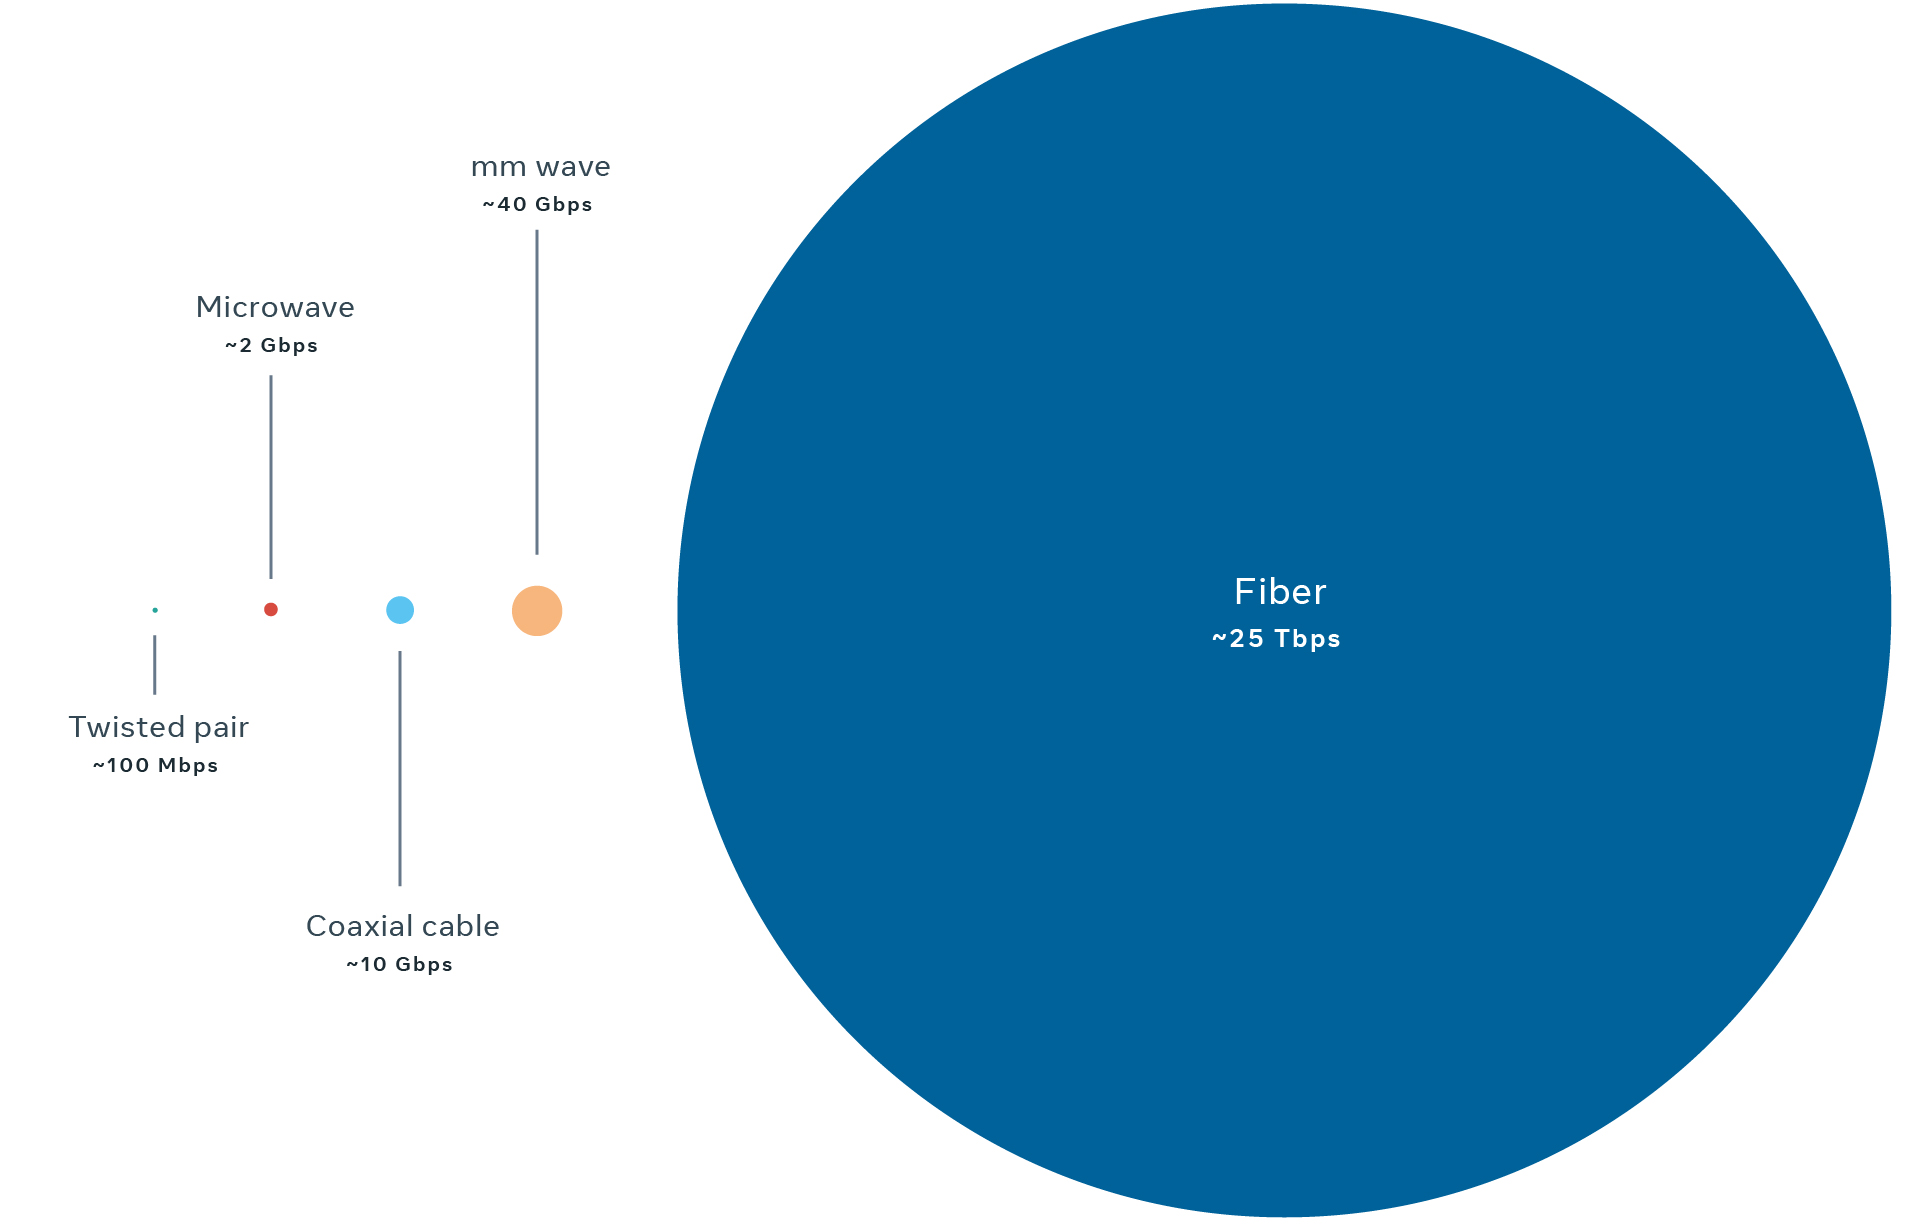 The size of each circle represents the typical maximum capacity that can be achieved over each backhaul technology.